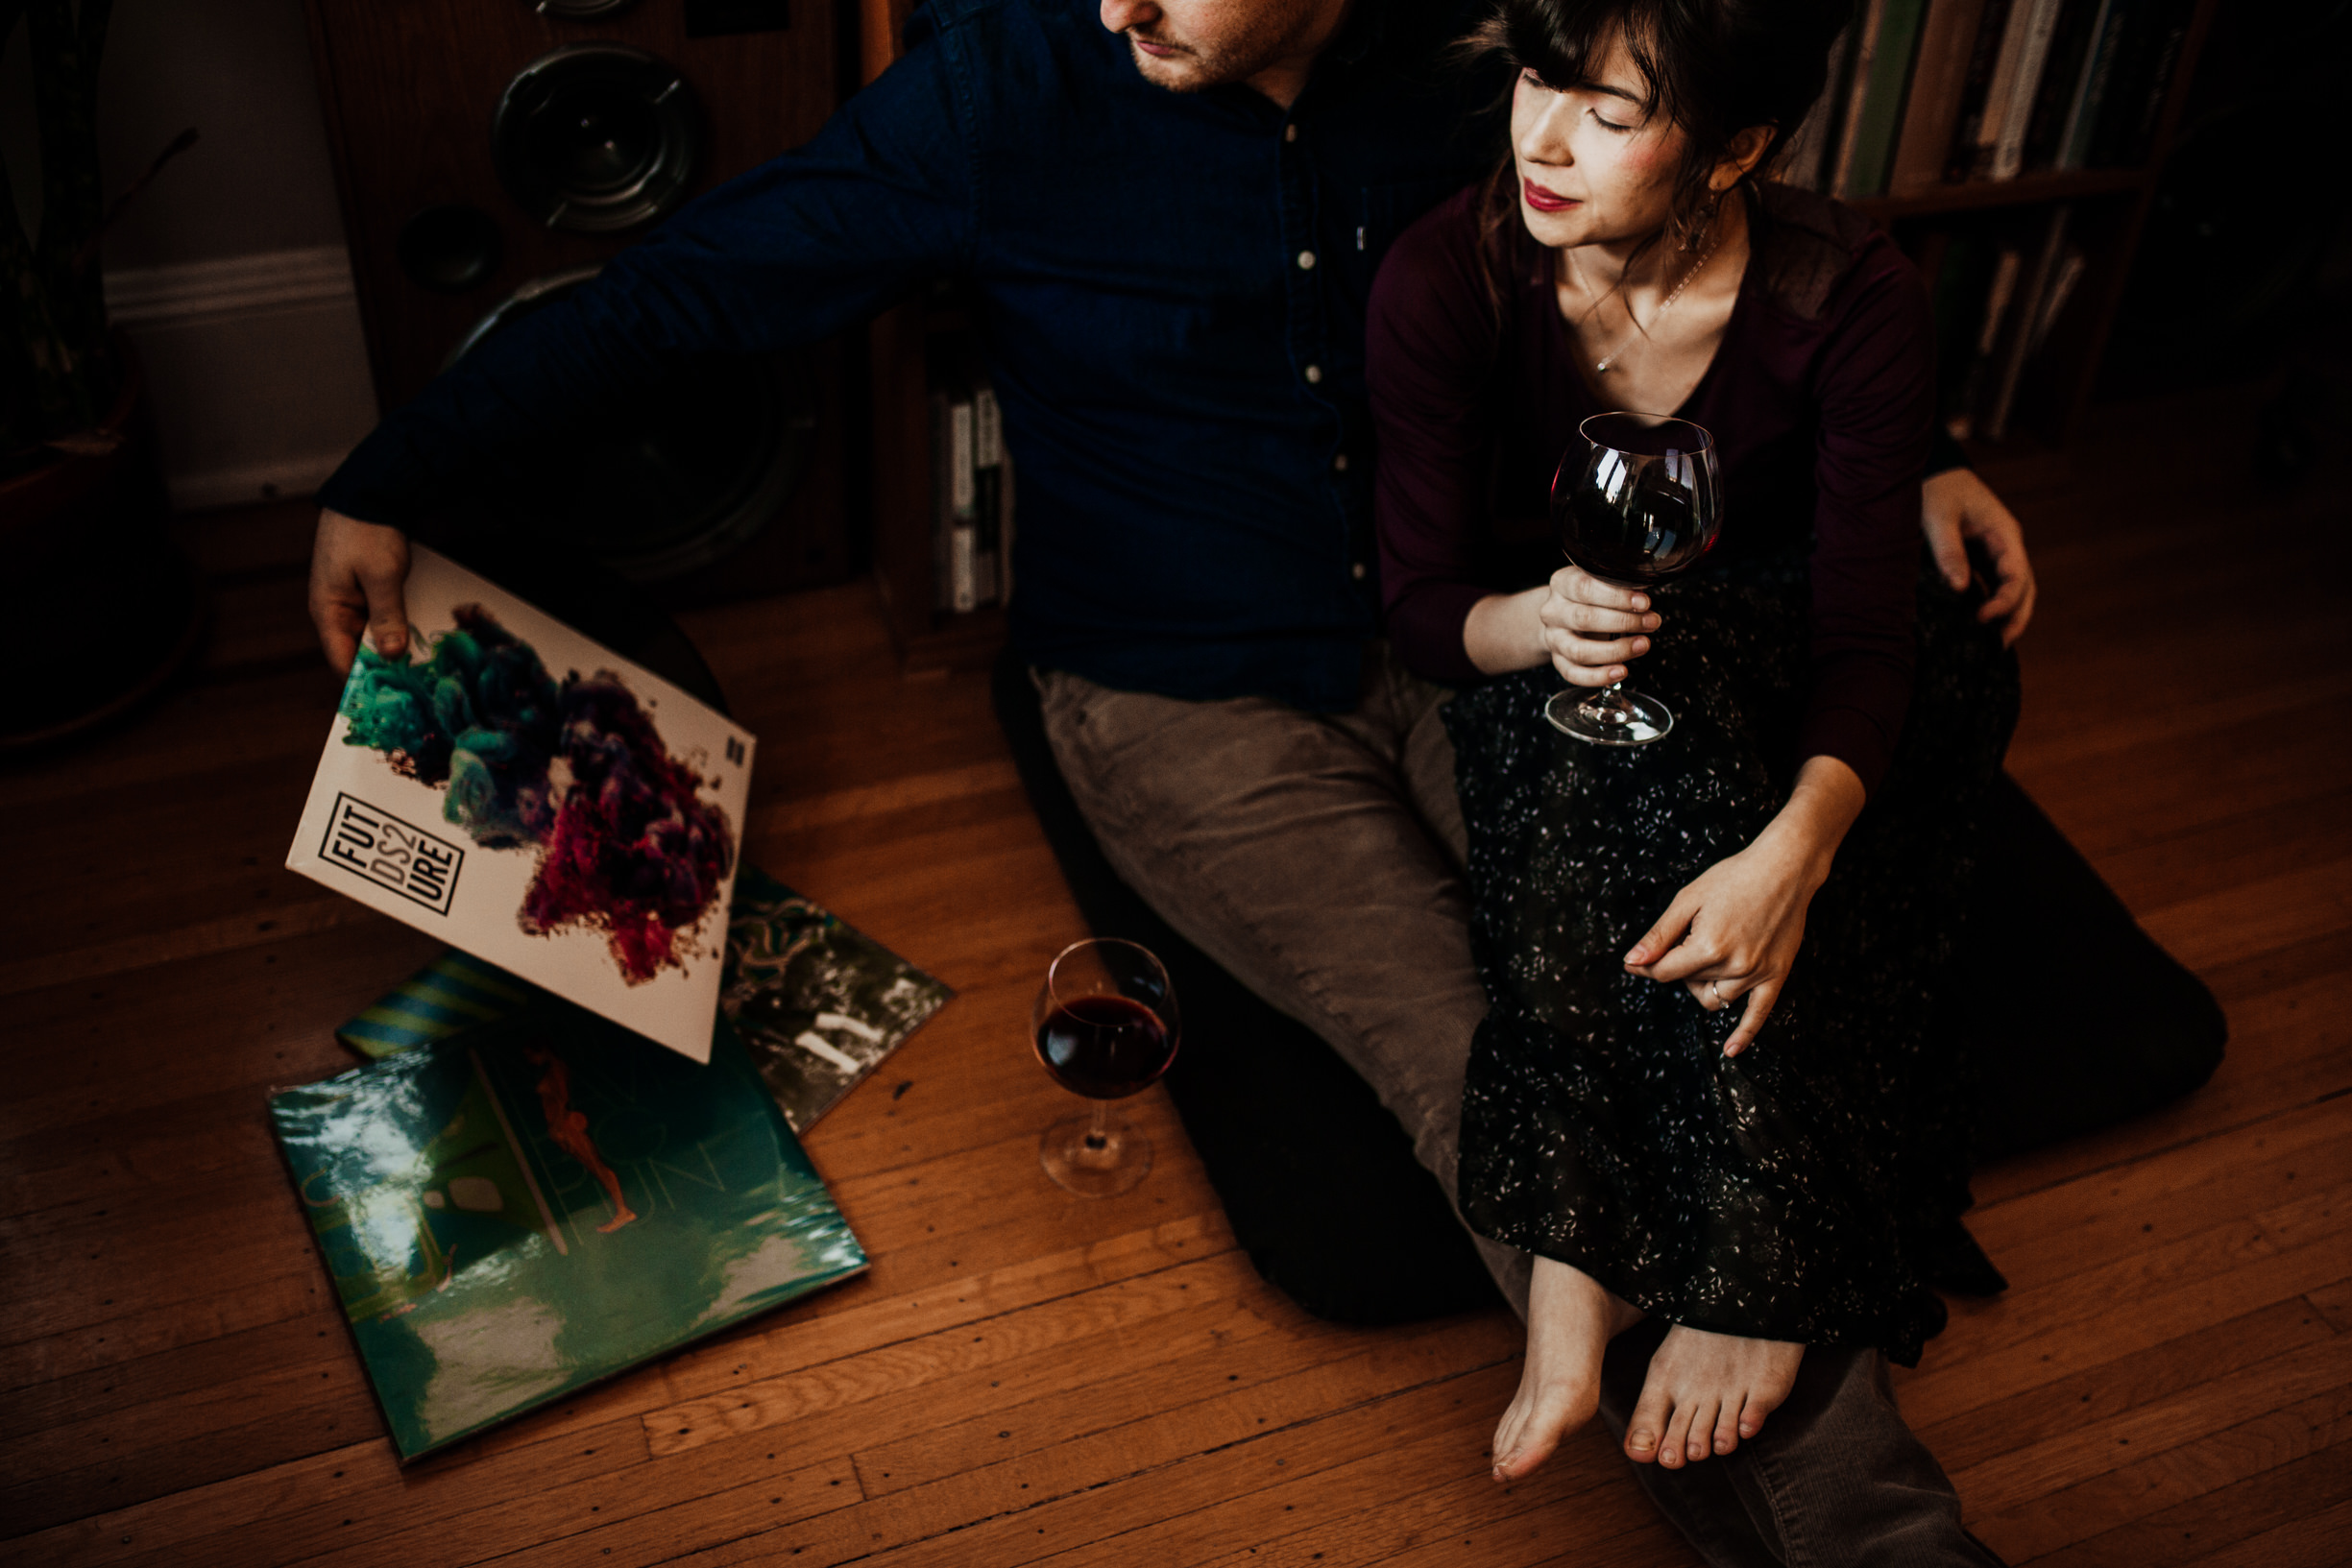 louisville-engagement-photographer-record-store-in-home-session-crystal-ludwick-photo (25 of 53).jpg